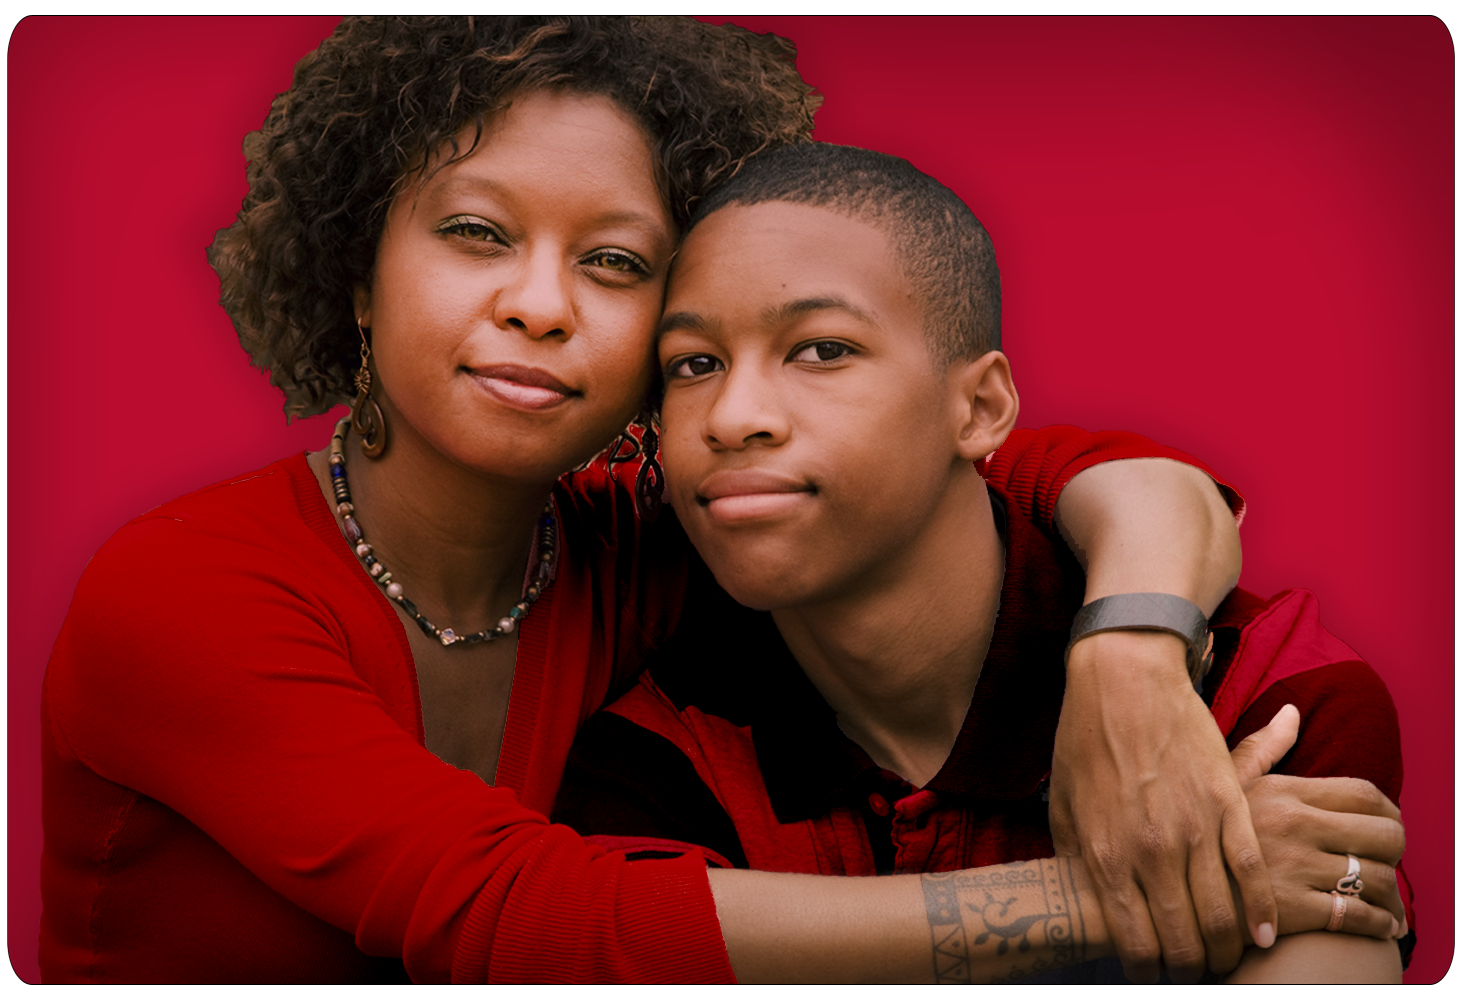 Research that makes a difference in the lives of African American families